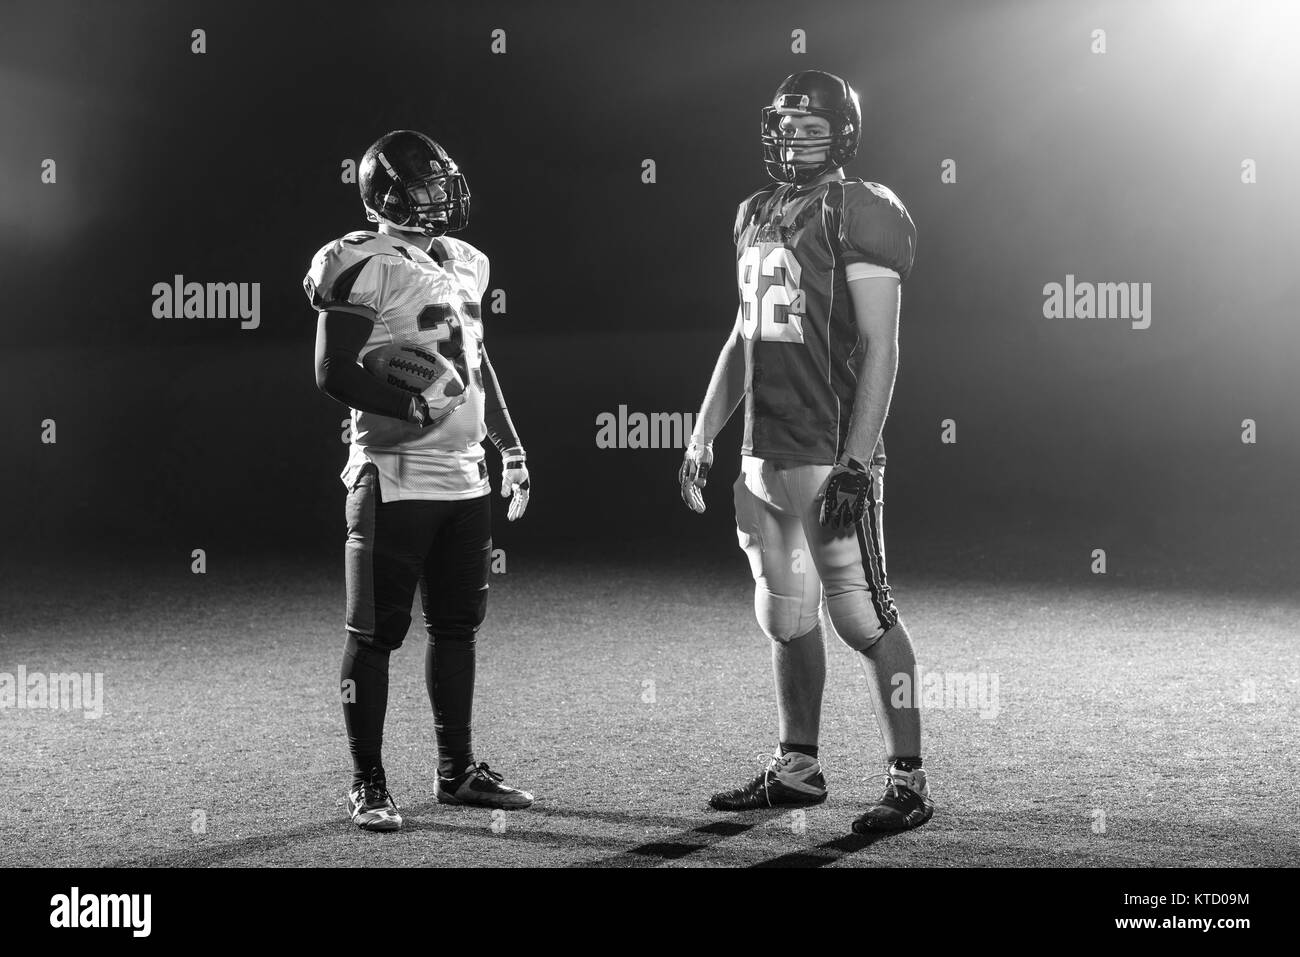 portrait of confident American football players holding ball while standing on field at night Stock Photo